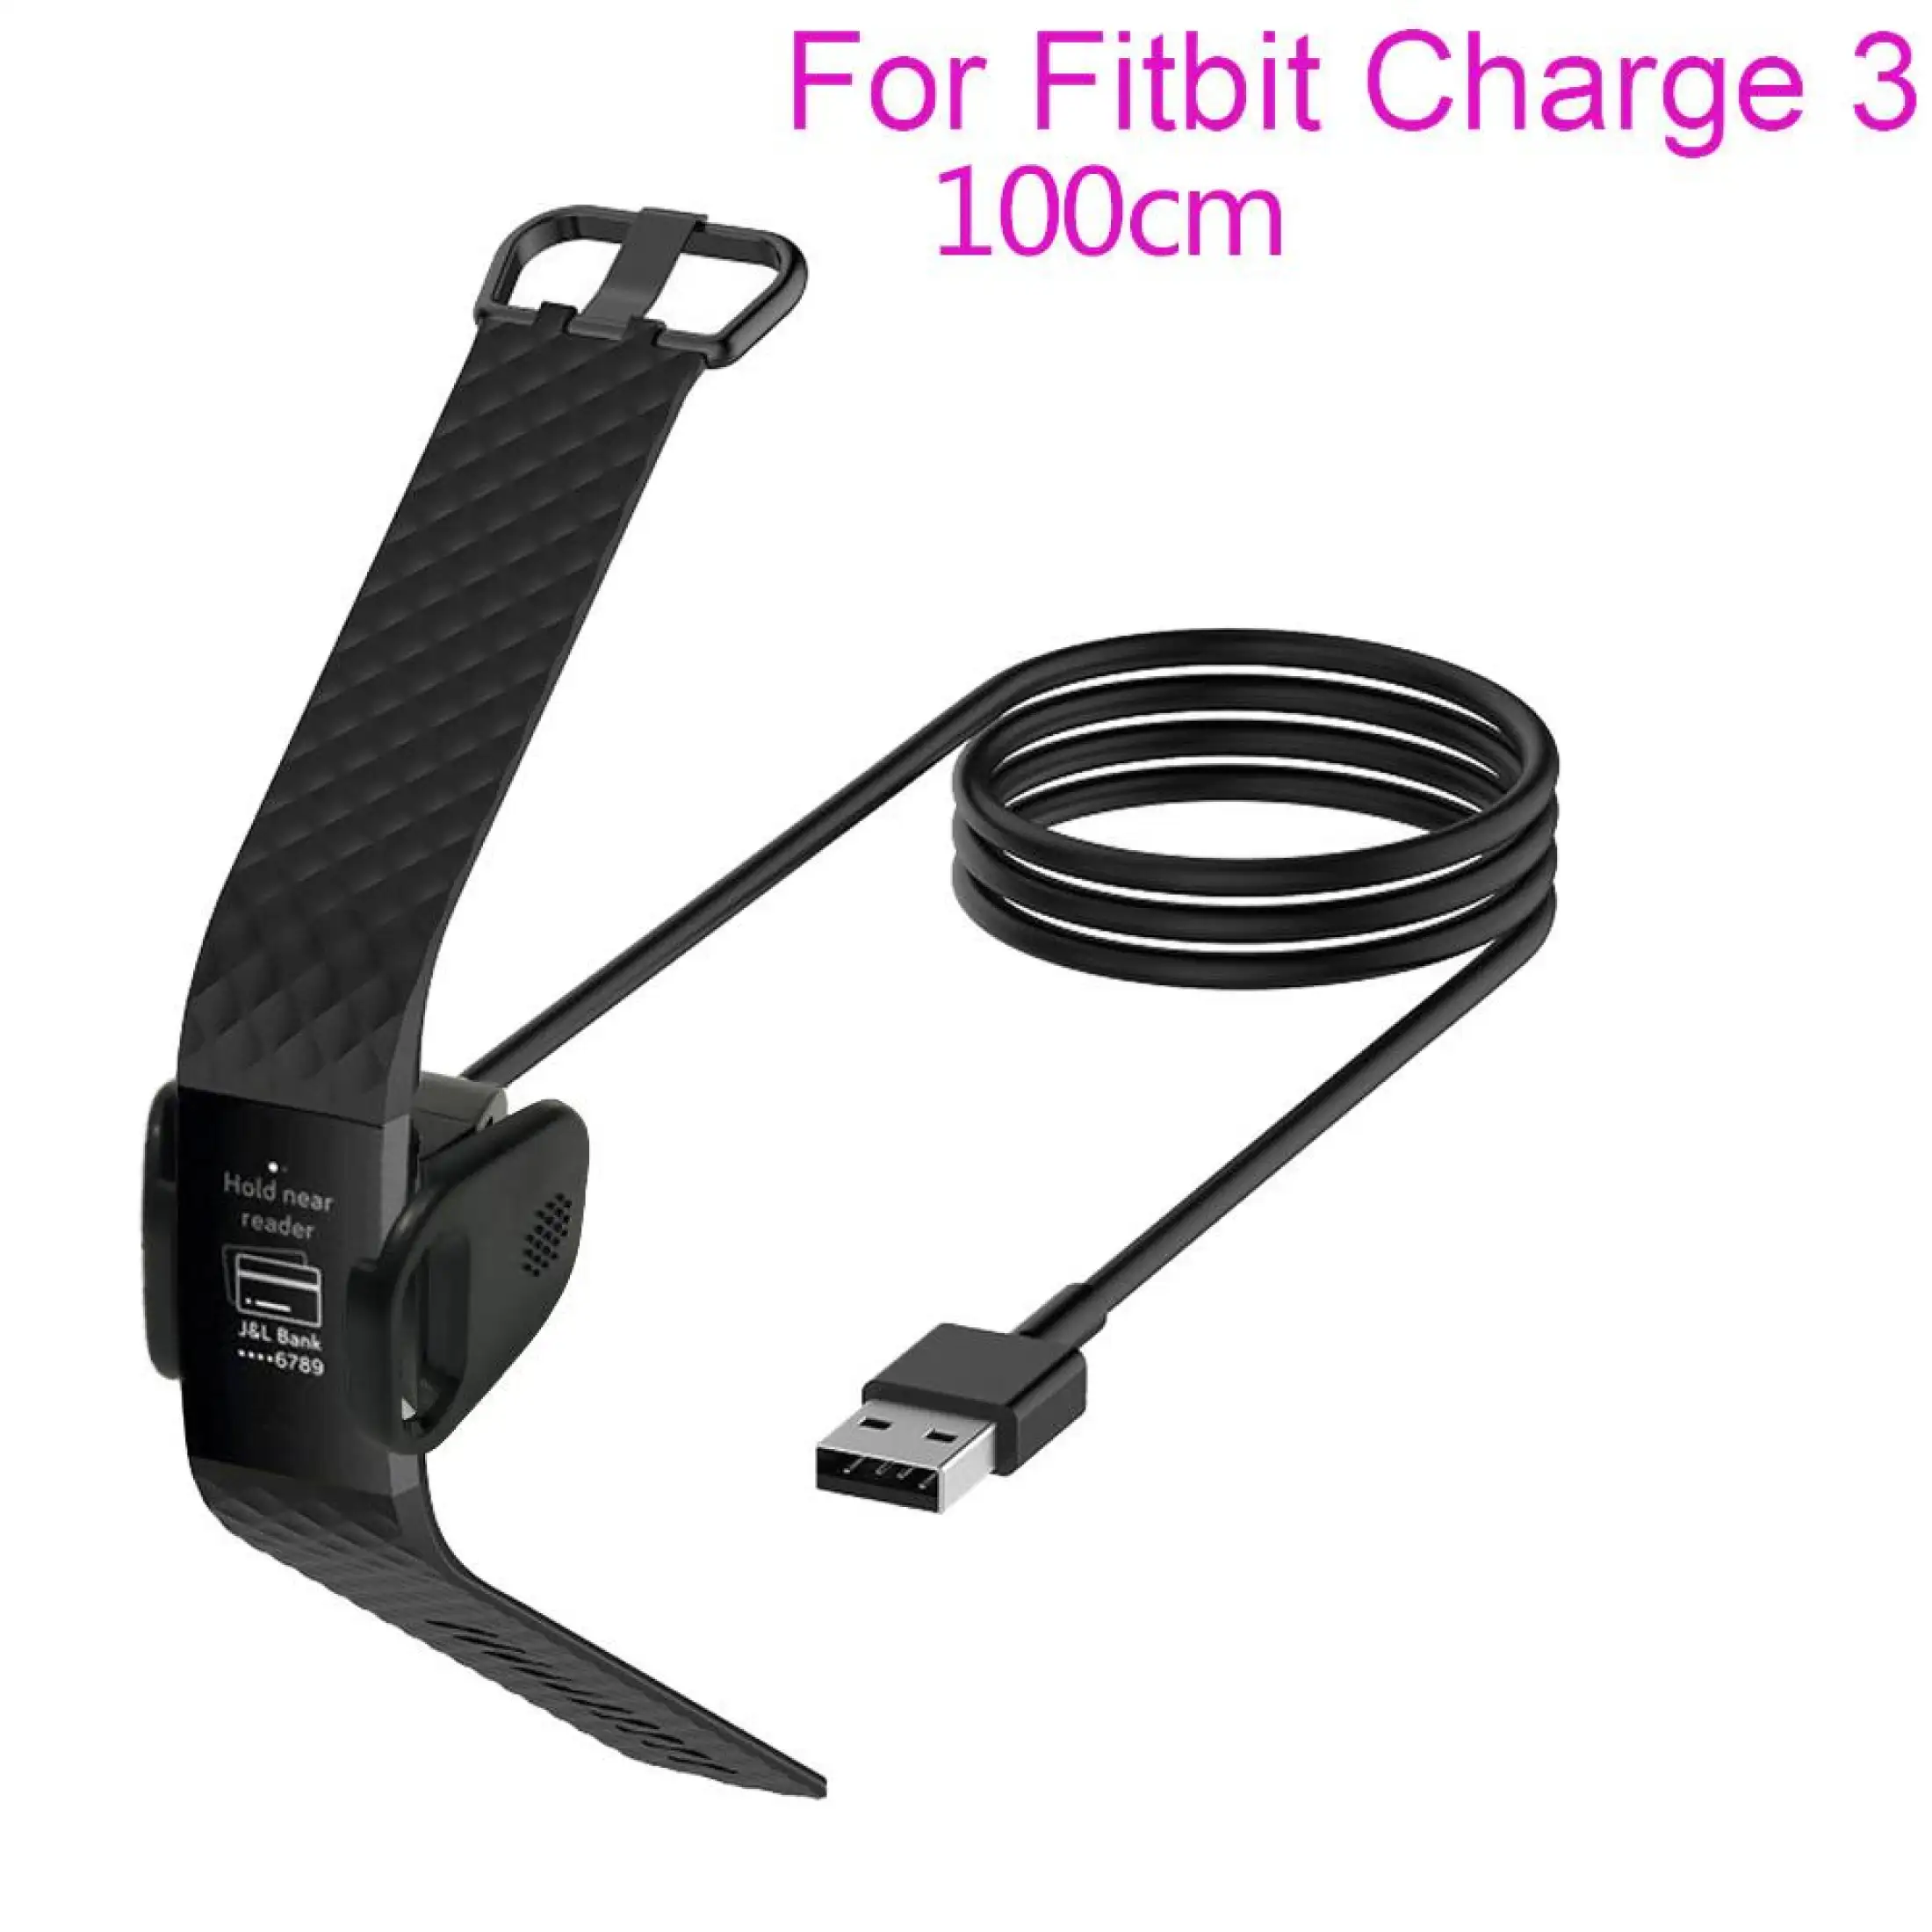 charging my fitbit charge 3